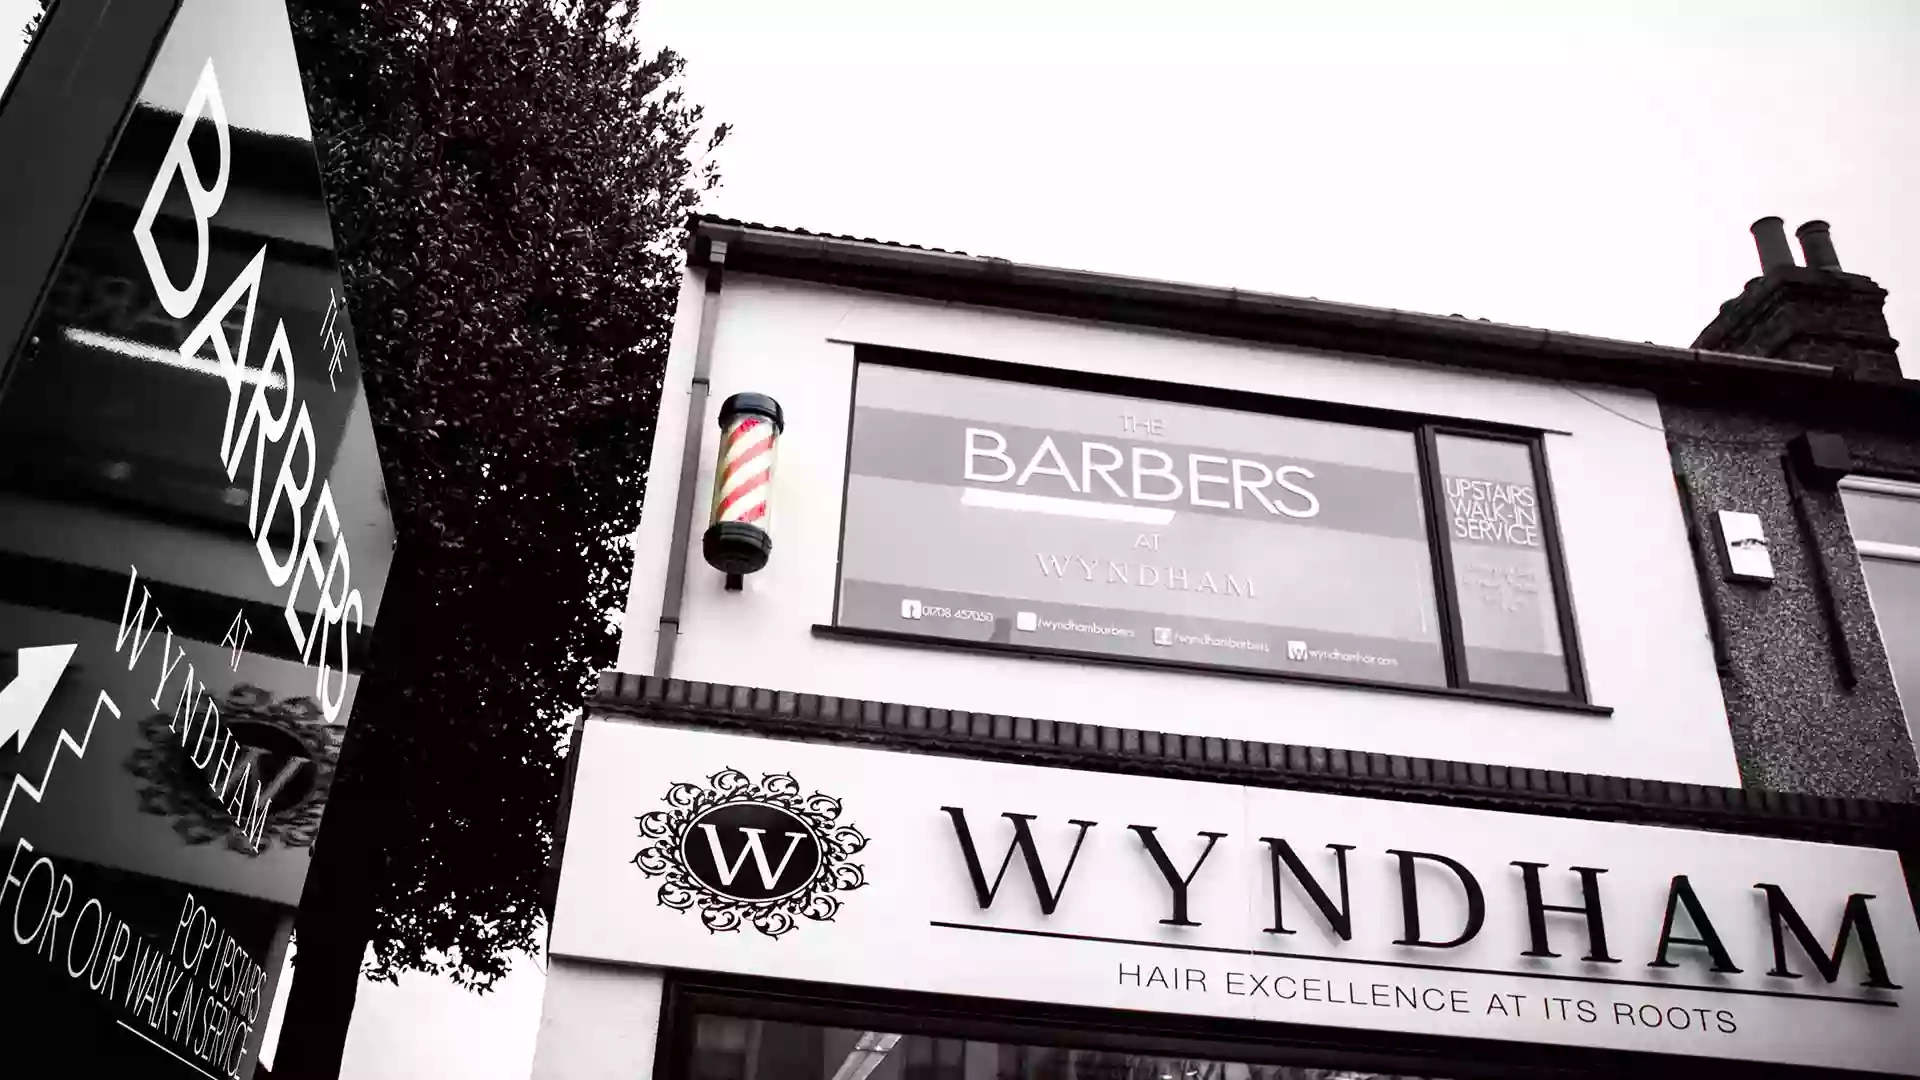 The Barbers at Wyndham